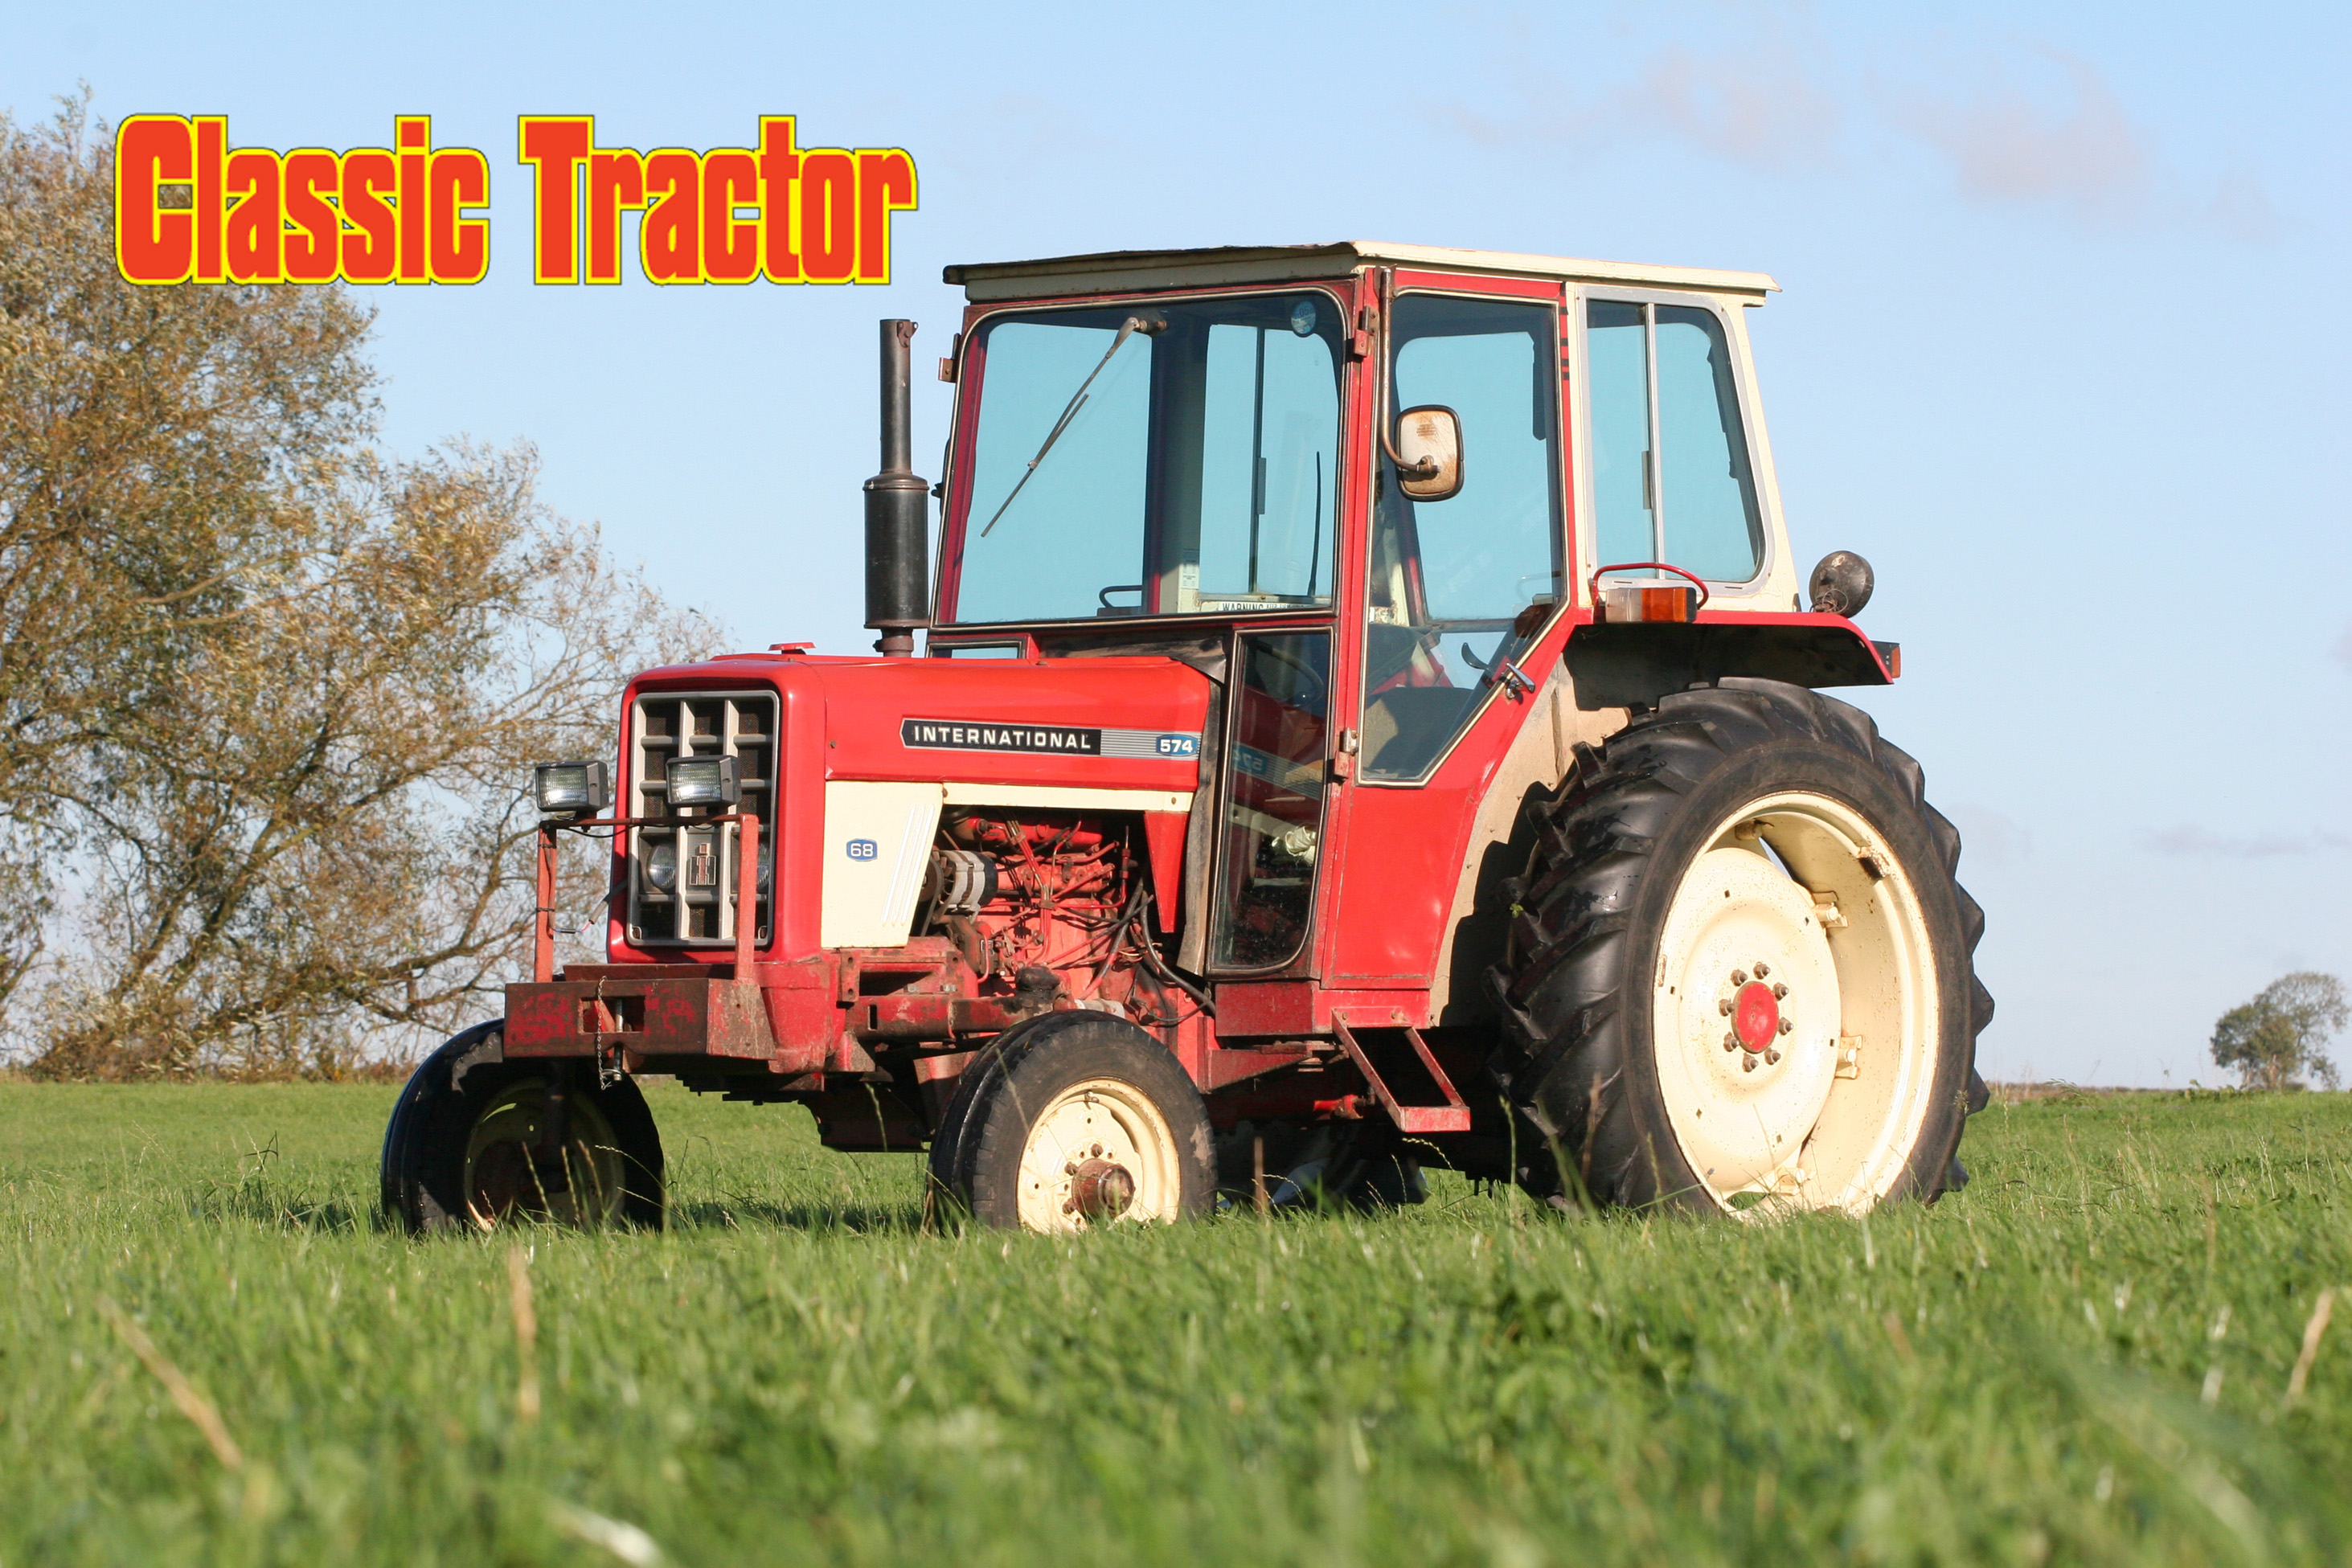 Wallpapers CLASSIC TRACTOR MAGAZINE